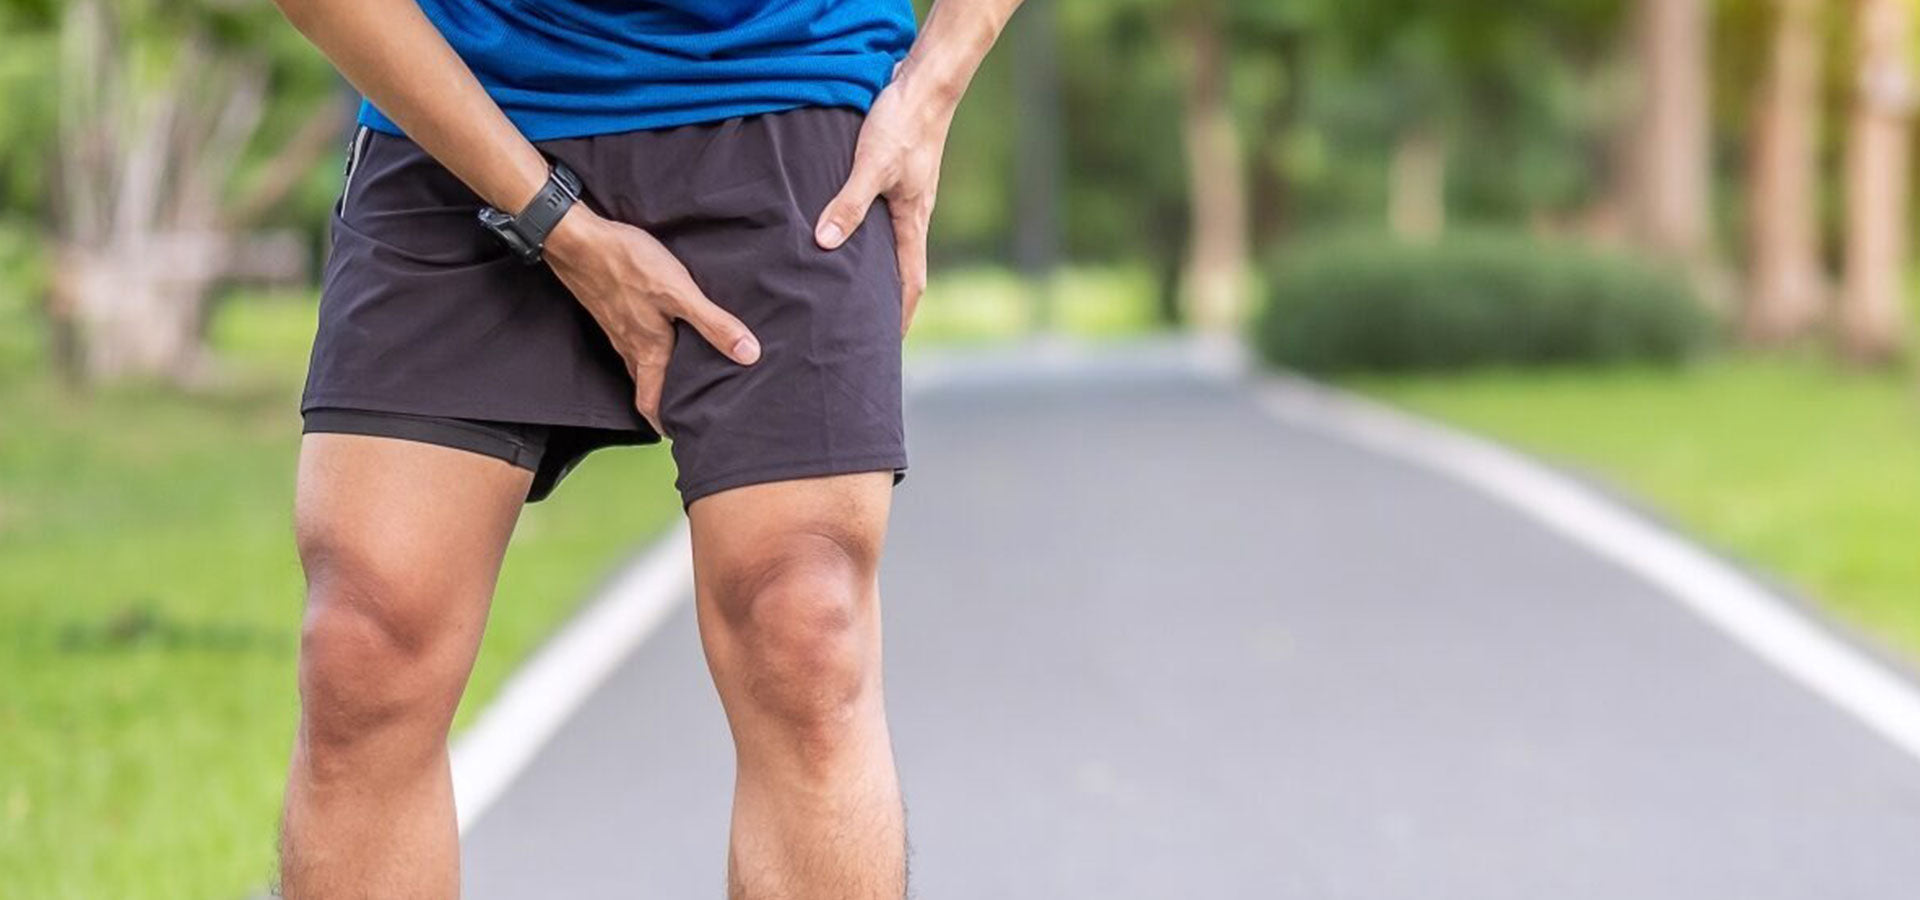 Osteitis pubis: Understanding, Preventing, and Managing the Condition